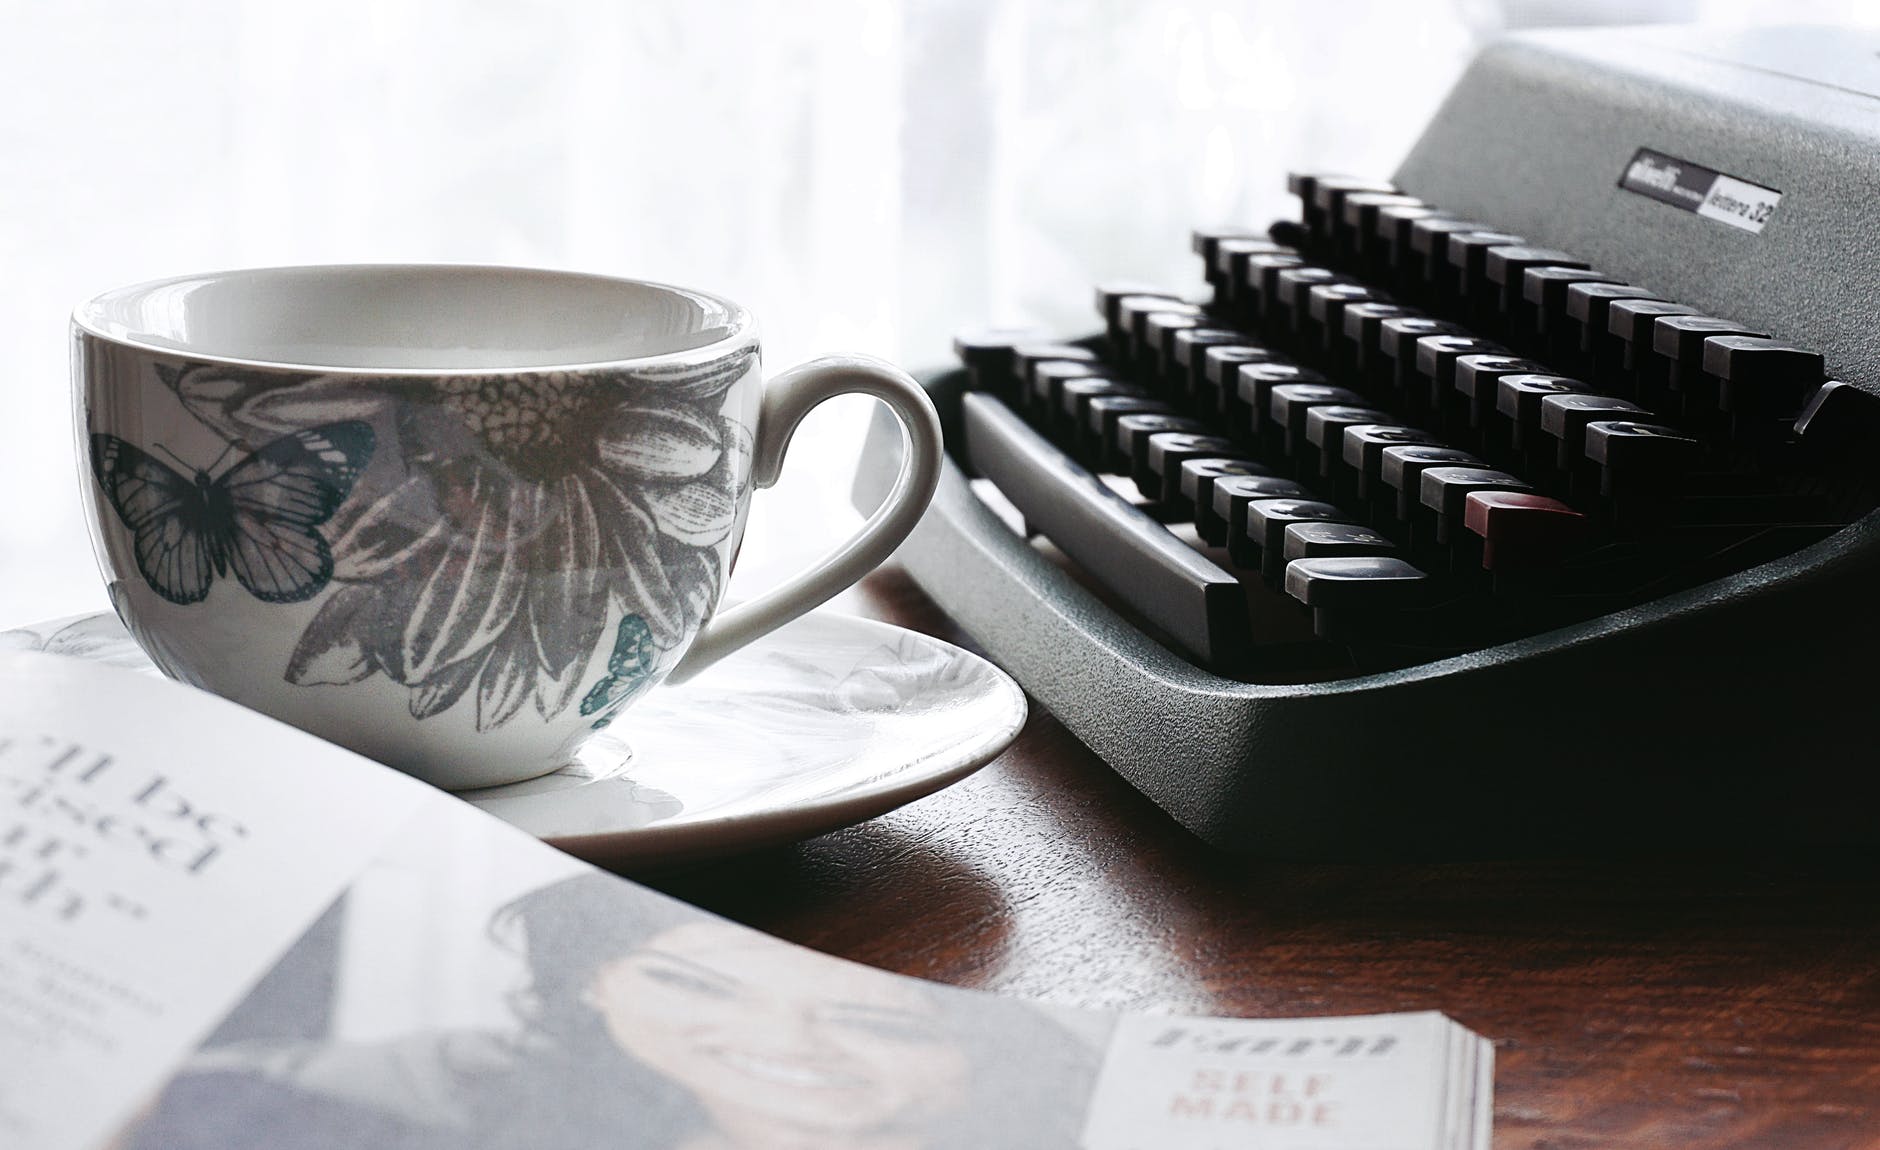 white and gray floral ceramic cup and saucer near black typewriter and book